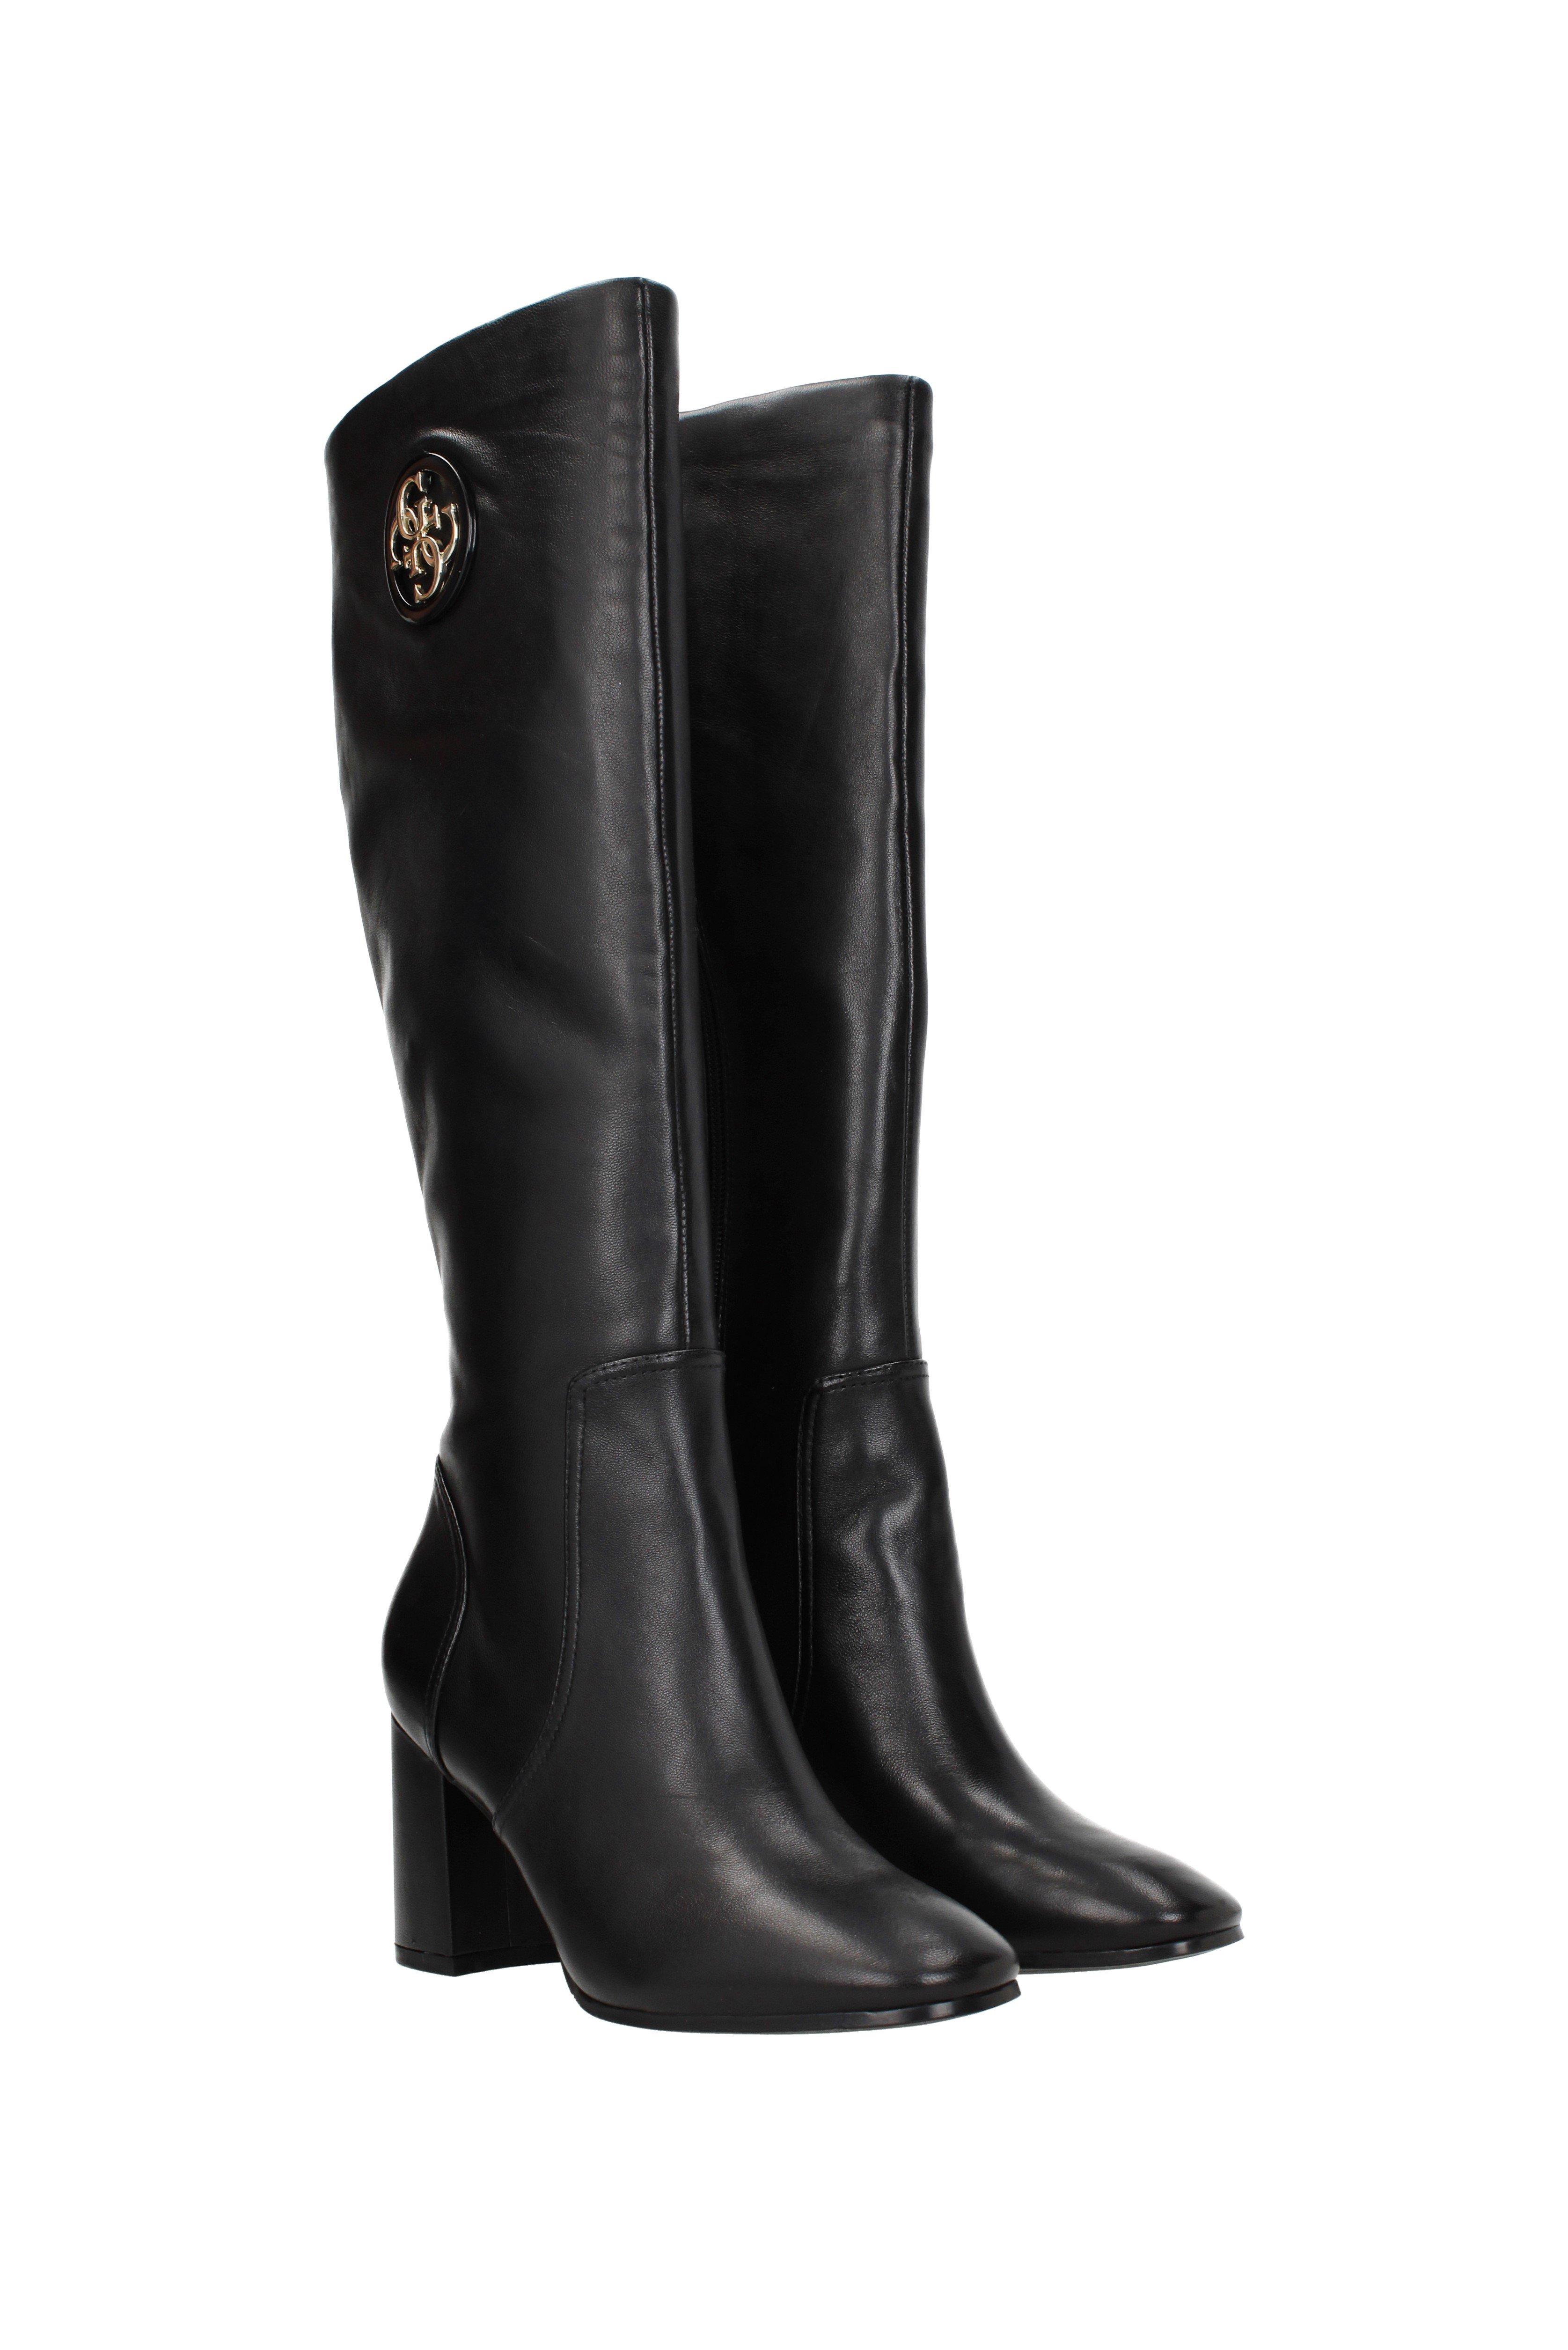 Guess Black Boots - Lyst